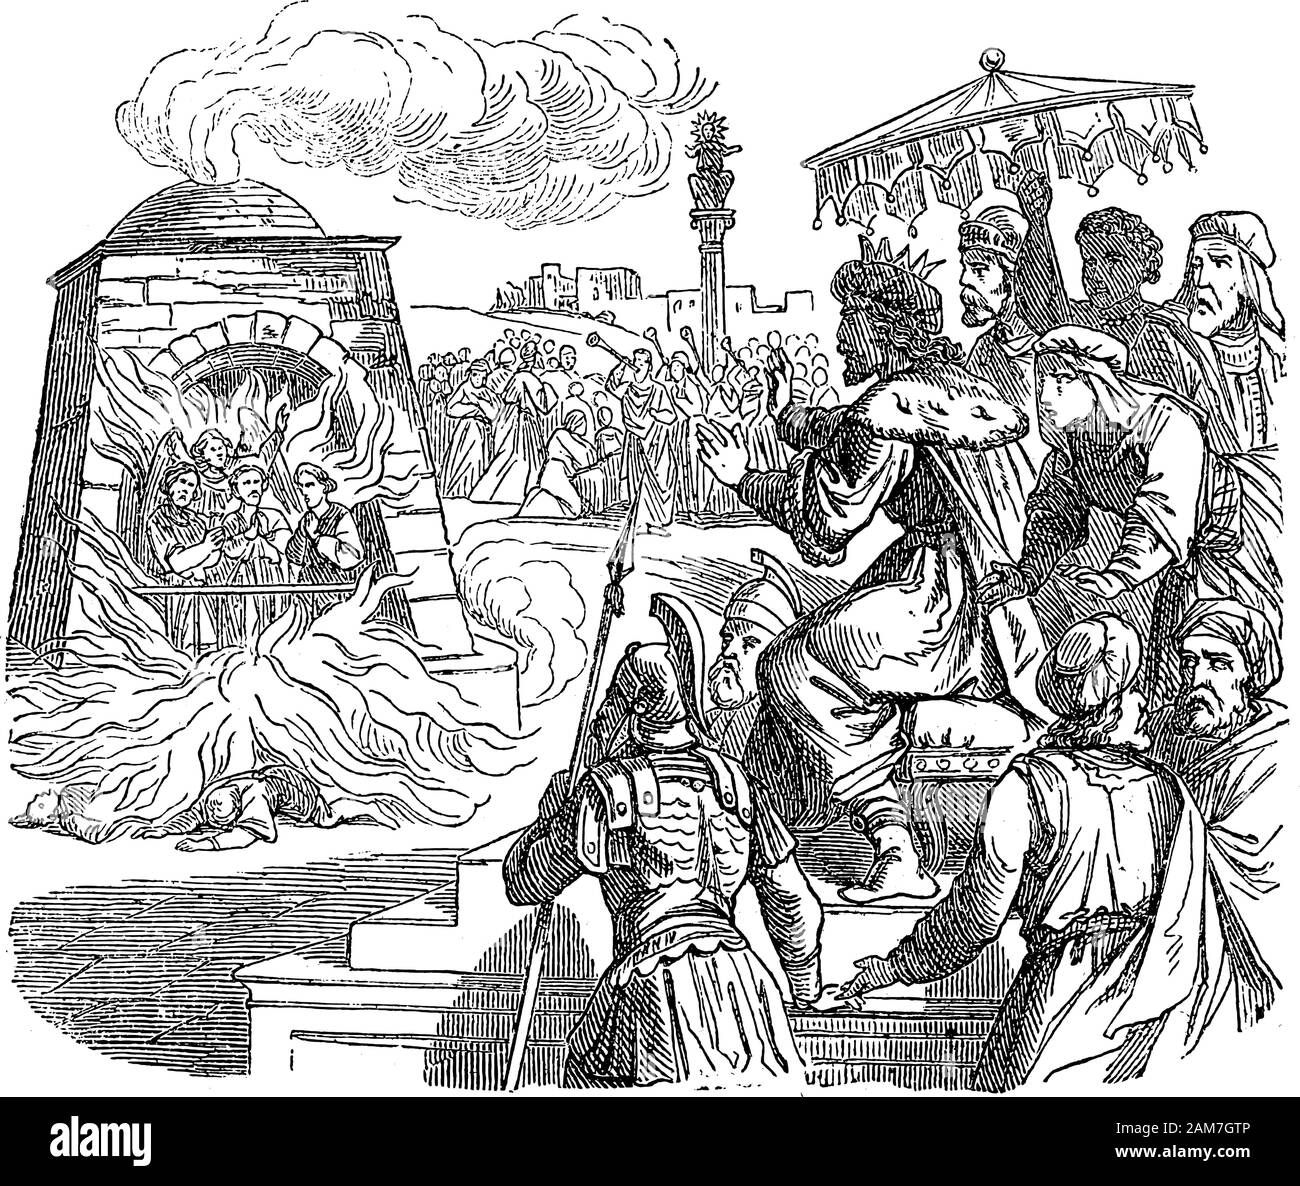 Vintage drawing or engraving of biblical story of three Jews set in fire in roaring furnace by king Nebuchadnezzar of Babylon, but rescued by angel.Bible, Old Testament,Daniel 3. Biblische Geschichte , Germany 1859. Stock Vector